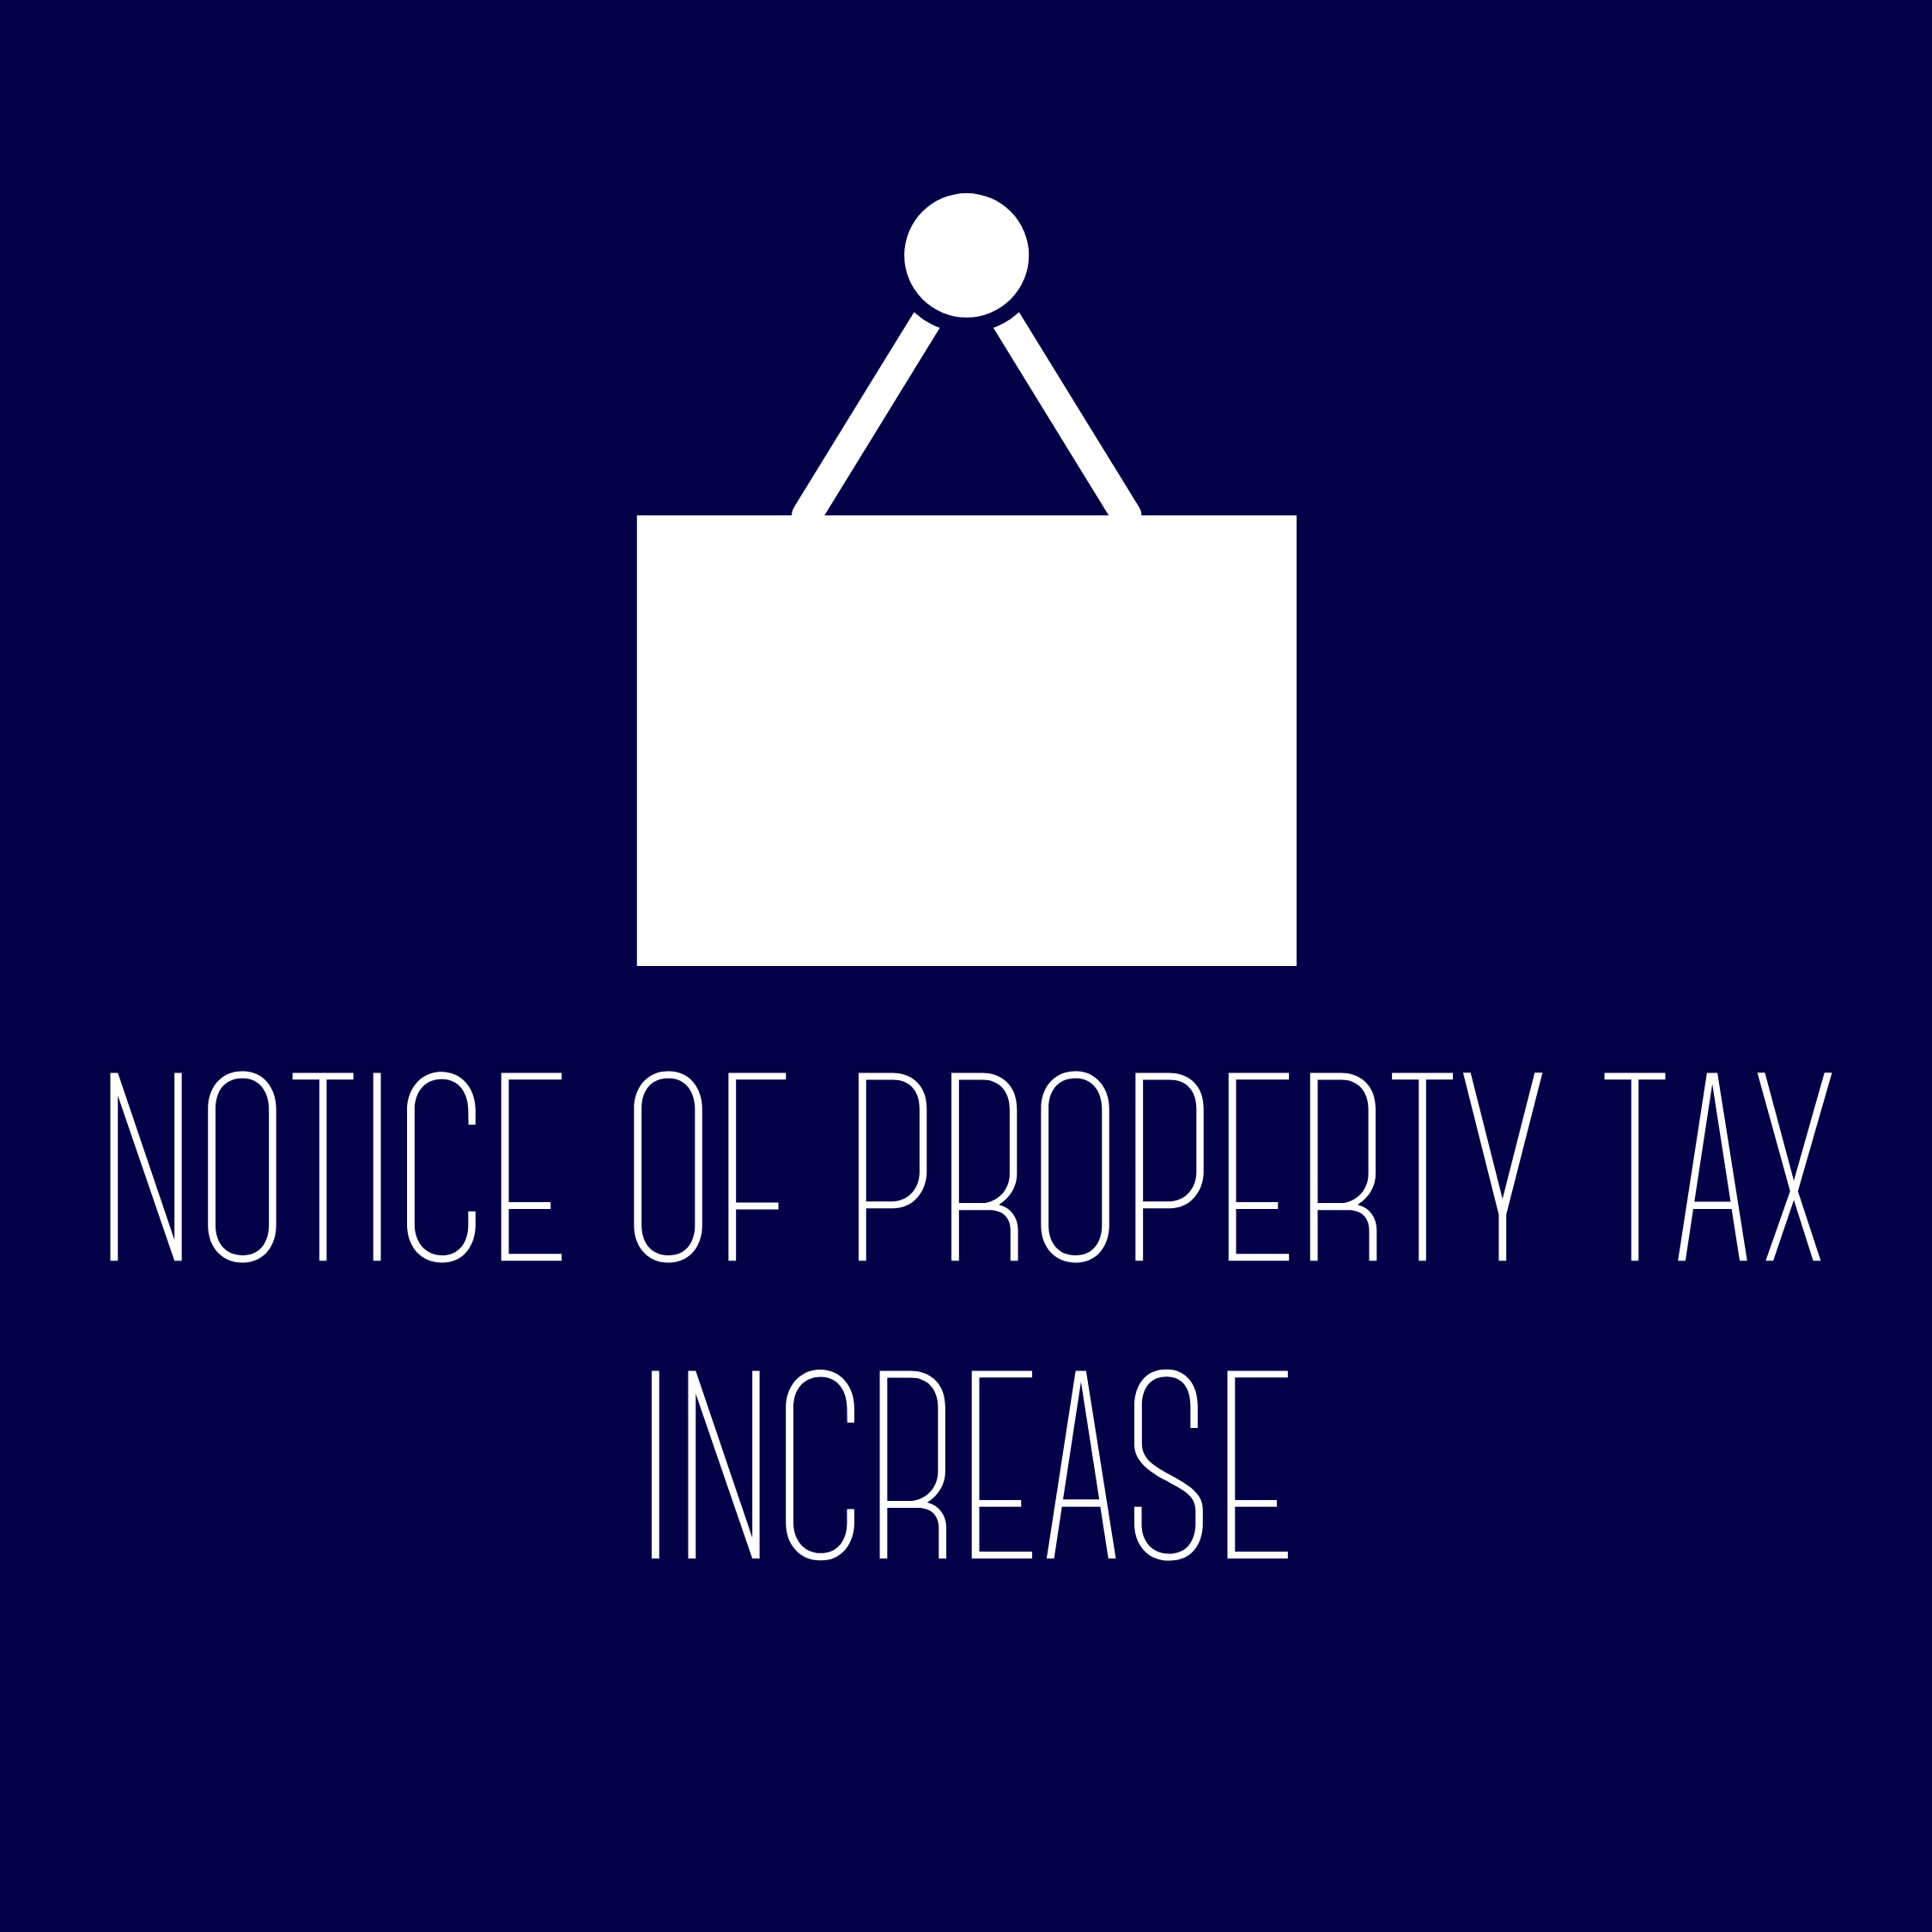 Notice of Property Tax Increase